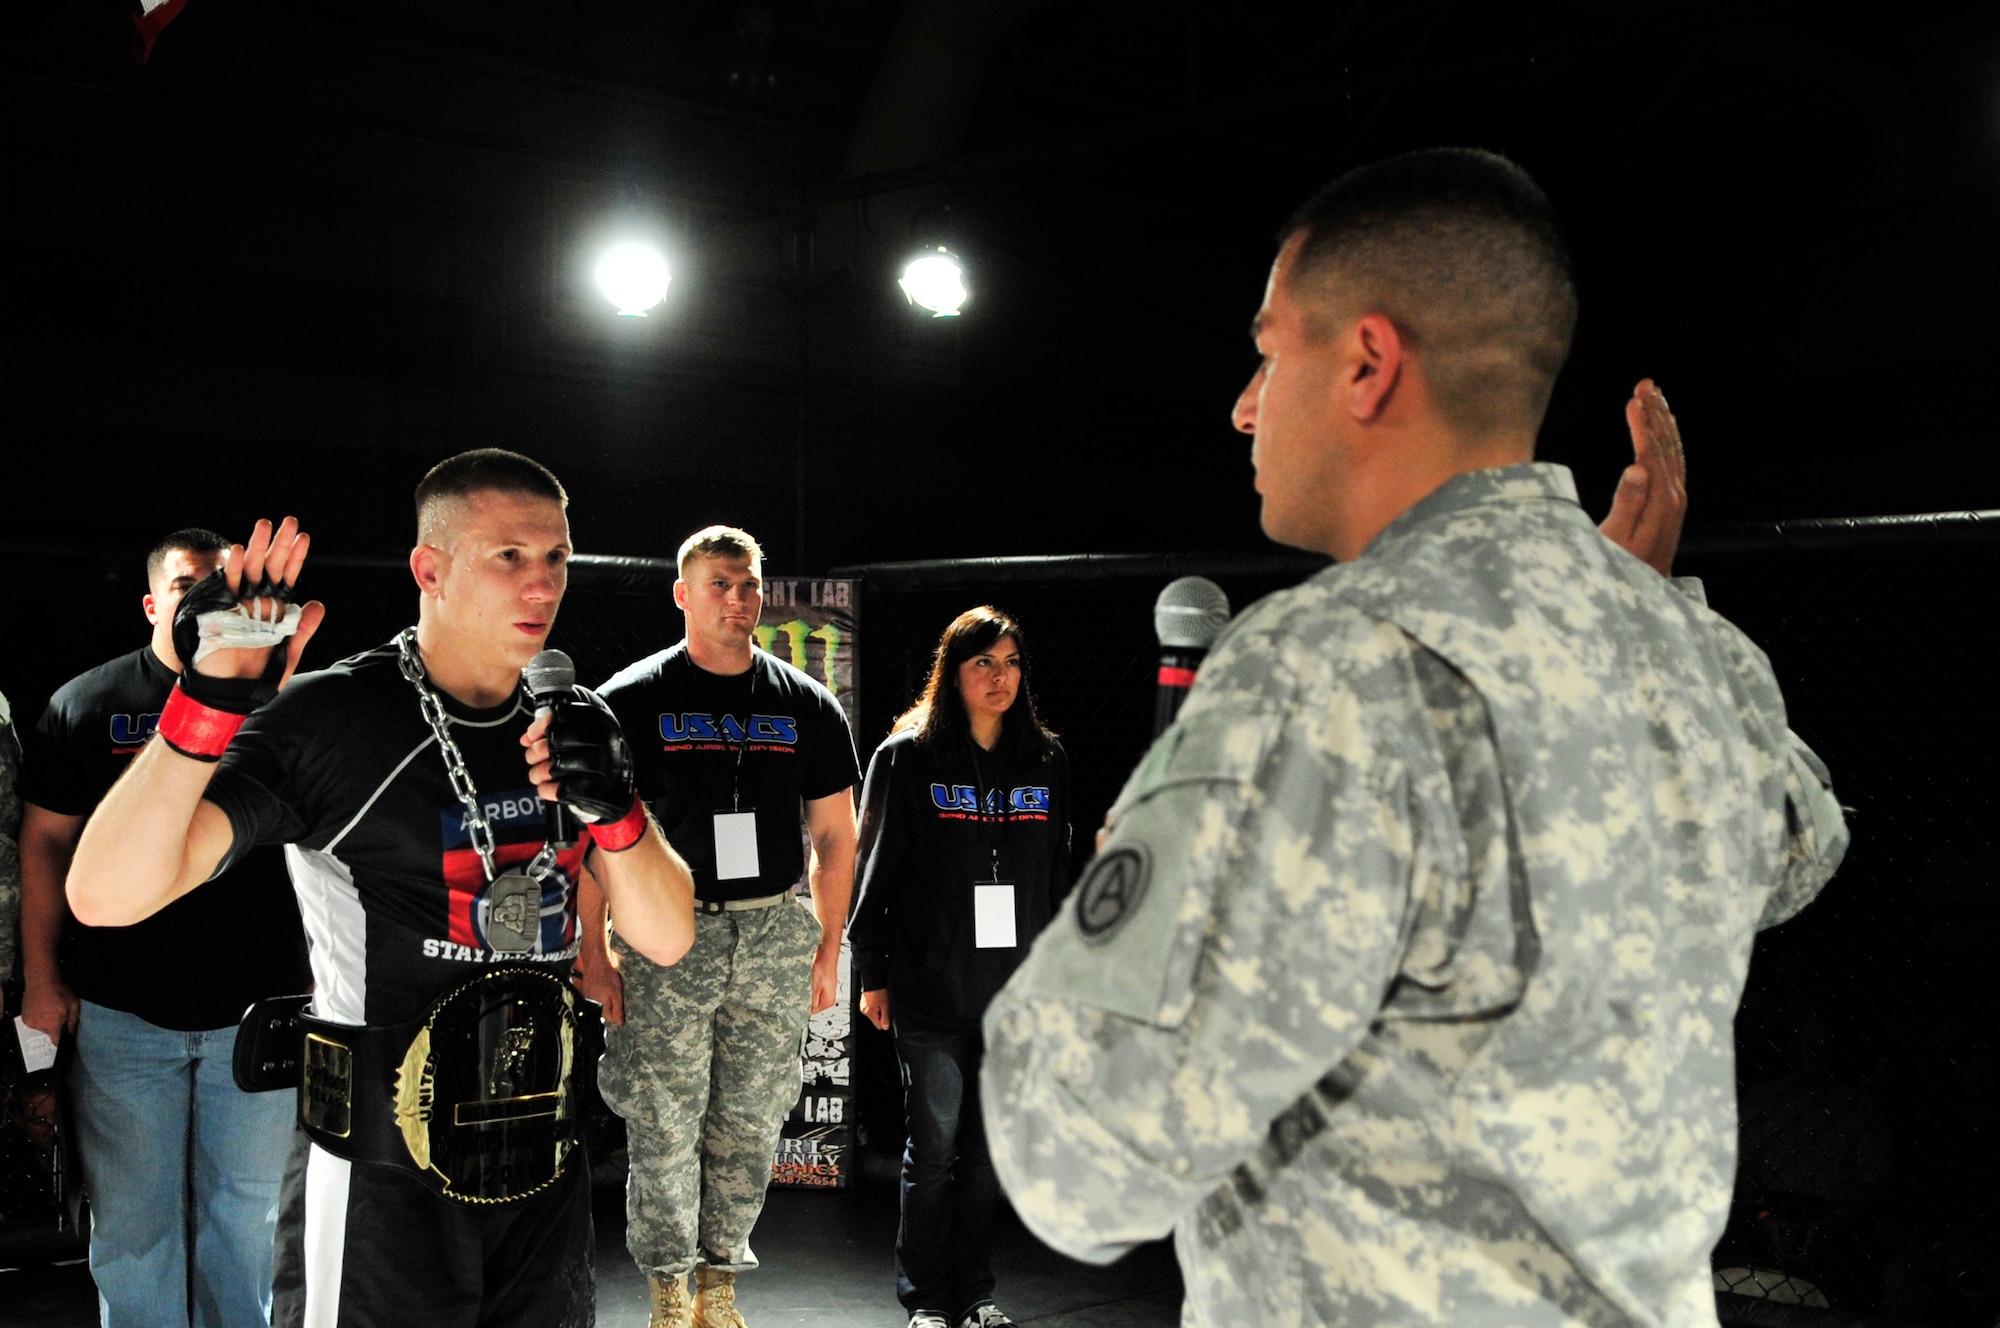 U.S. Army Sgt. Jesse Hertzog, 82nd Airborne Division reenlists after winning a cage fight against Jonathan Noah at the fitness center, Shaw Air Force Base, S.C., Oct. 12, 2012.  Hertzog along with 17 other fighters were paired together for nine fights. (U.S. Air Force photo by Airman Nicole Sikorski/Released)